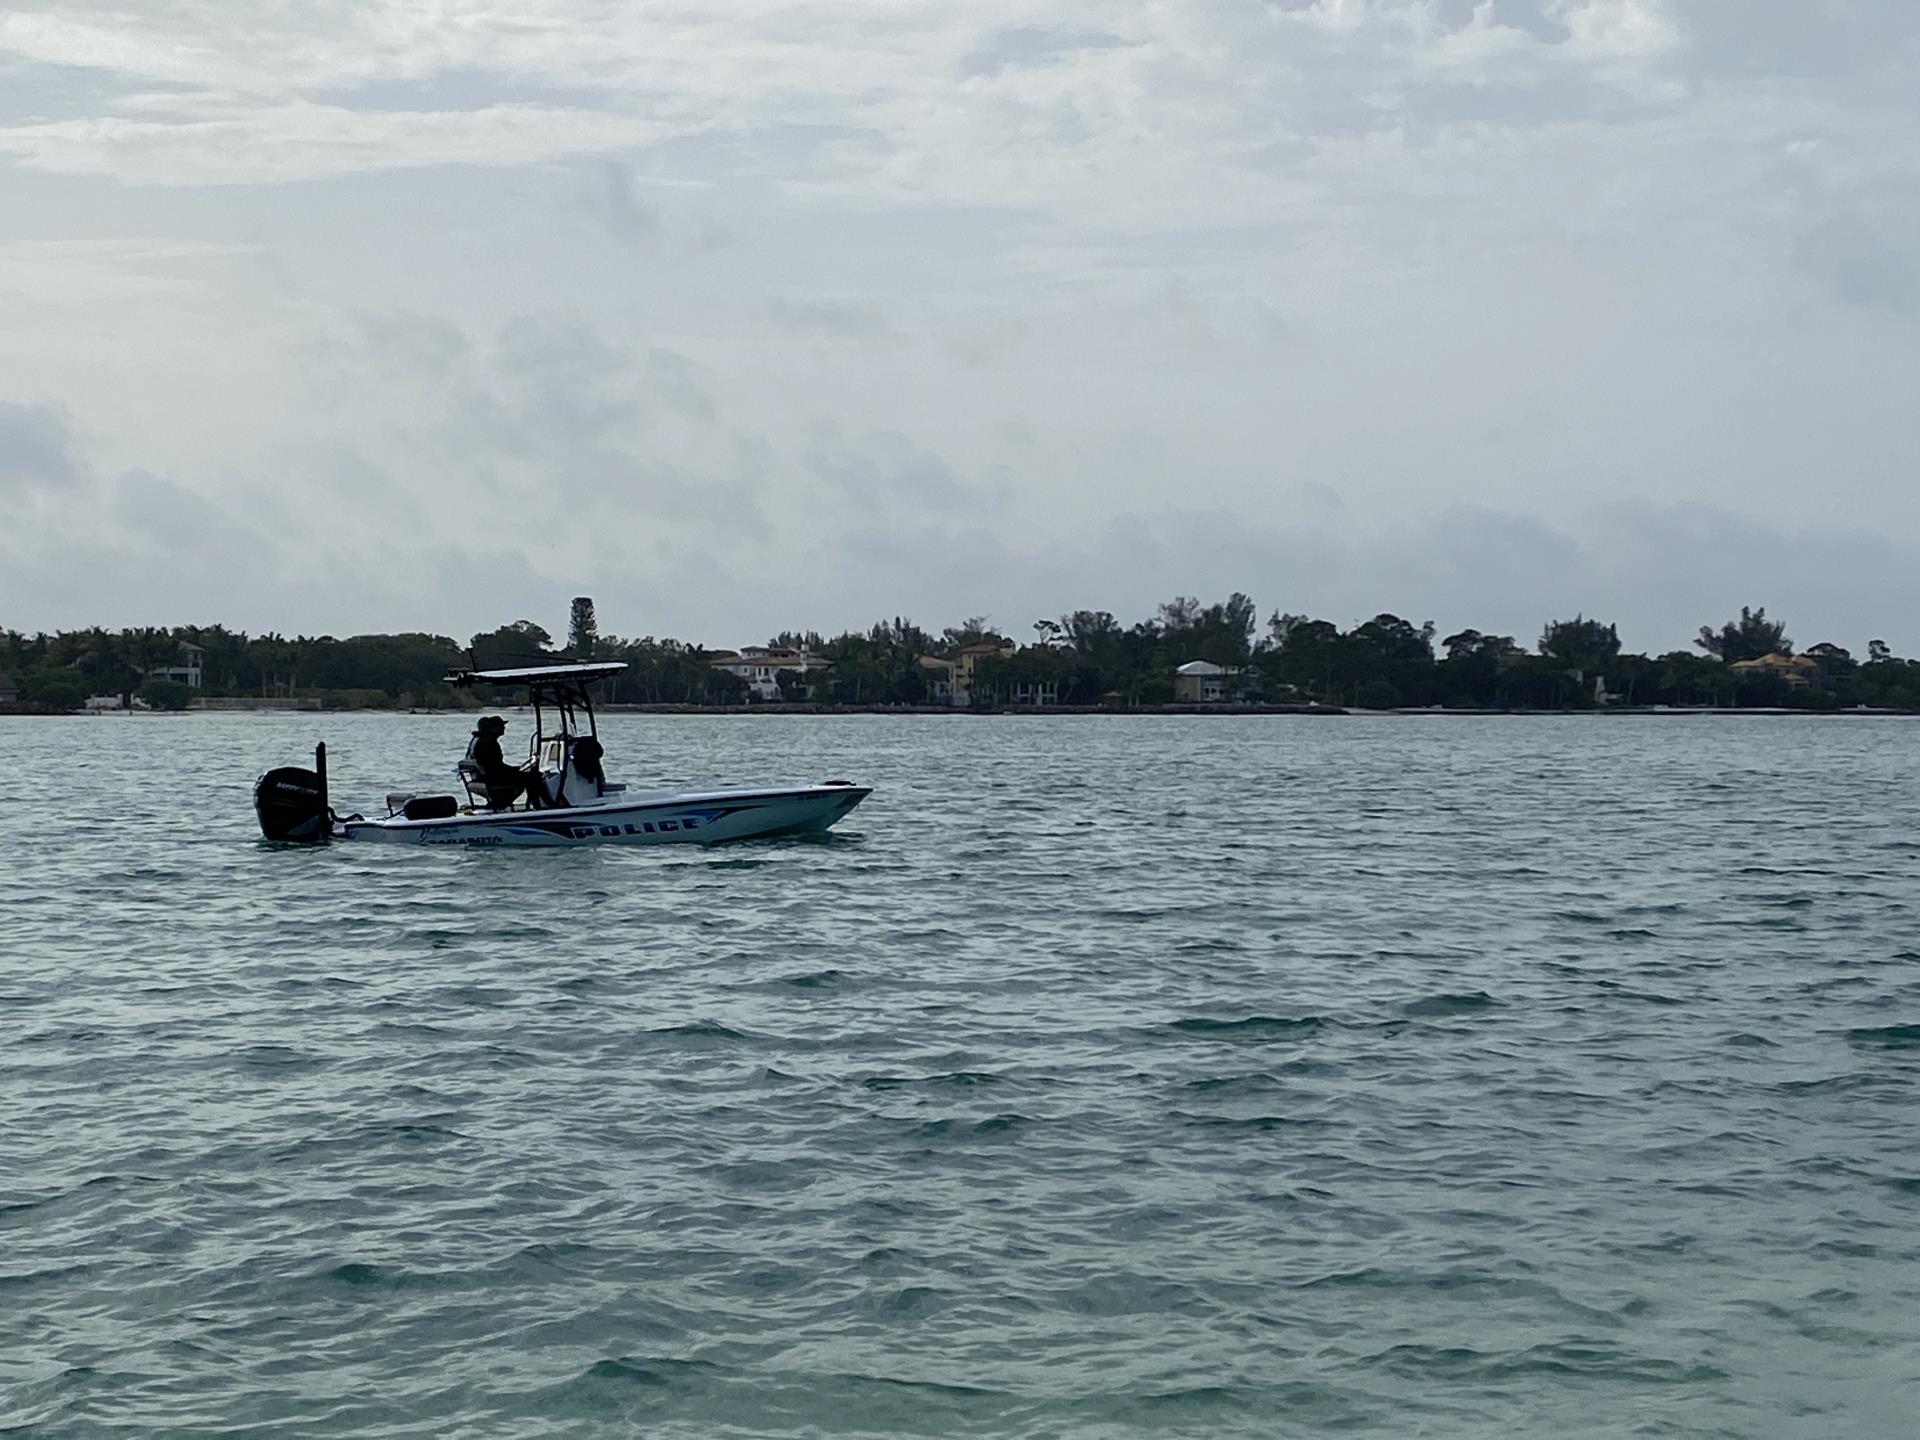 May 22, 2022 Sarasota Police Boat Searching for Missing Person off South Lido